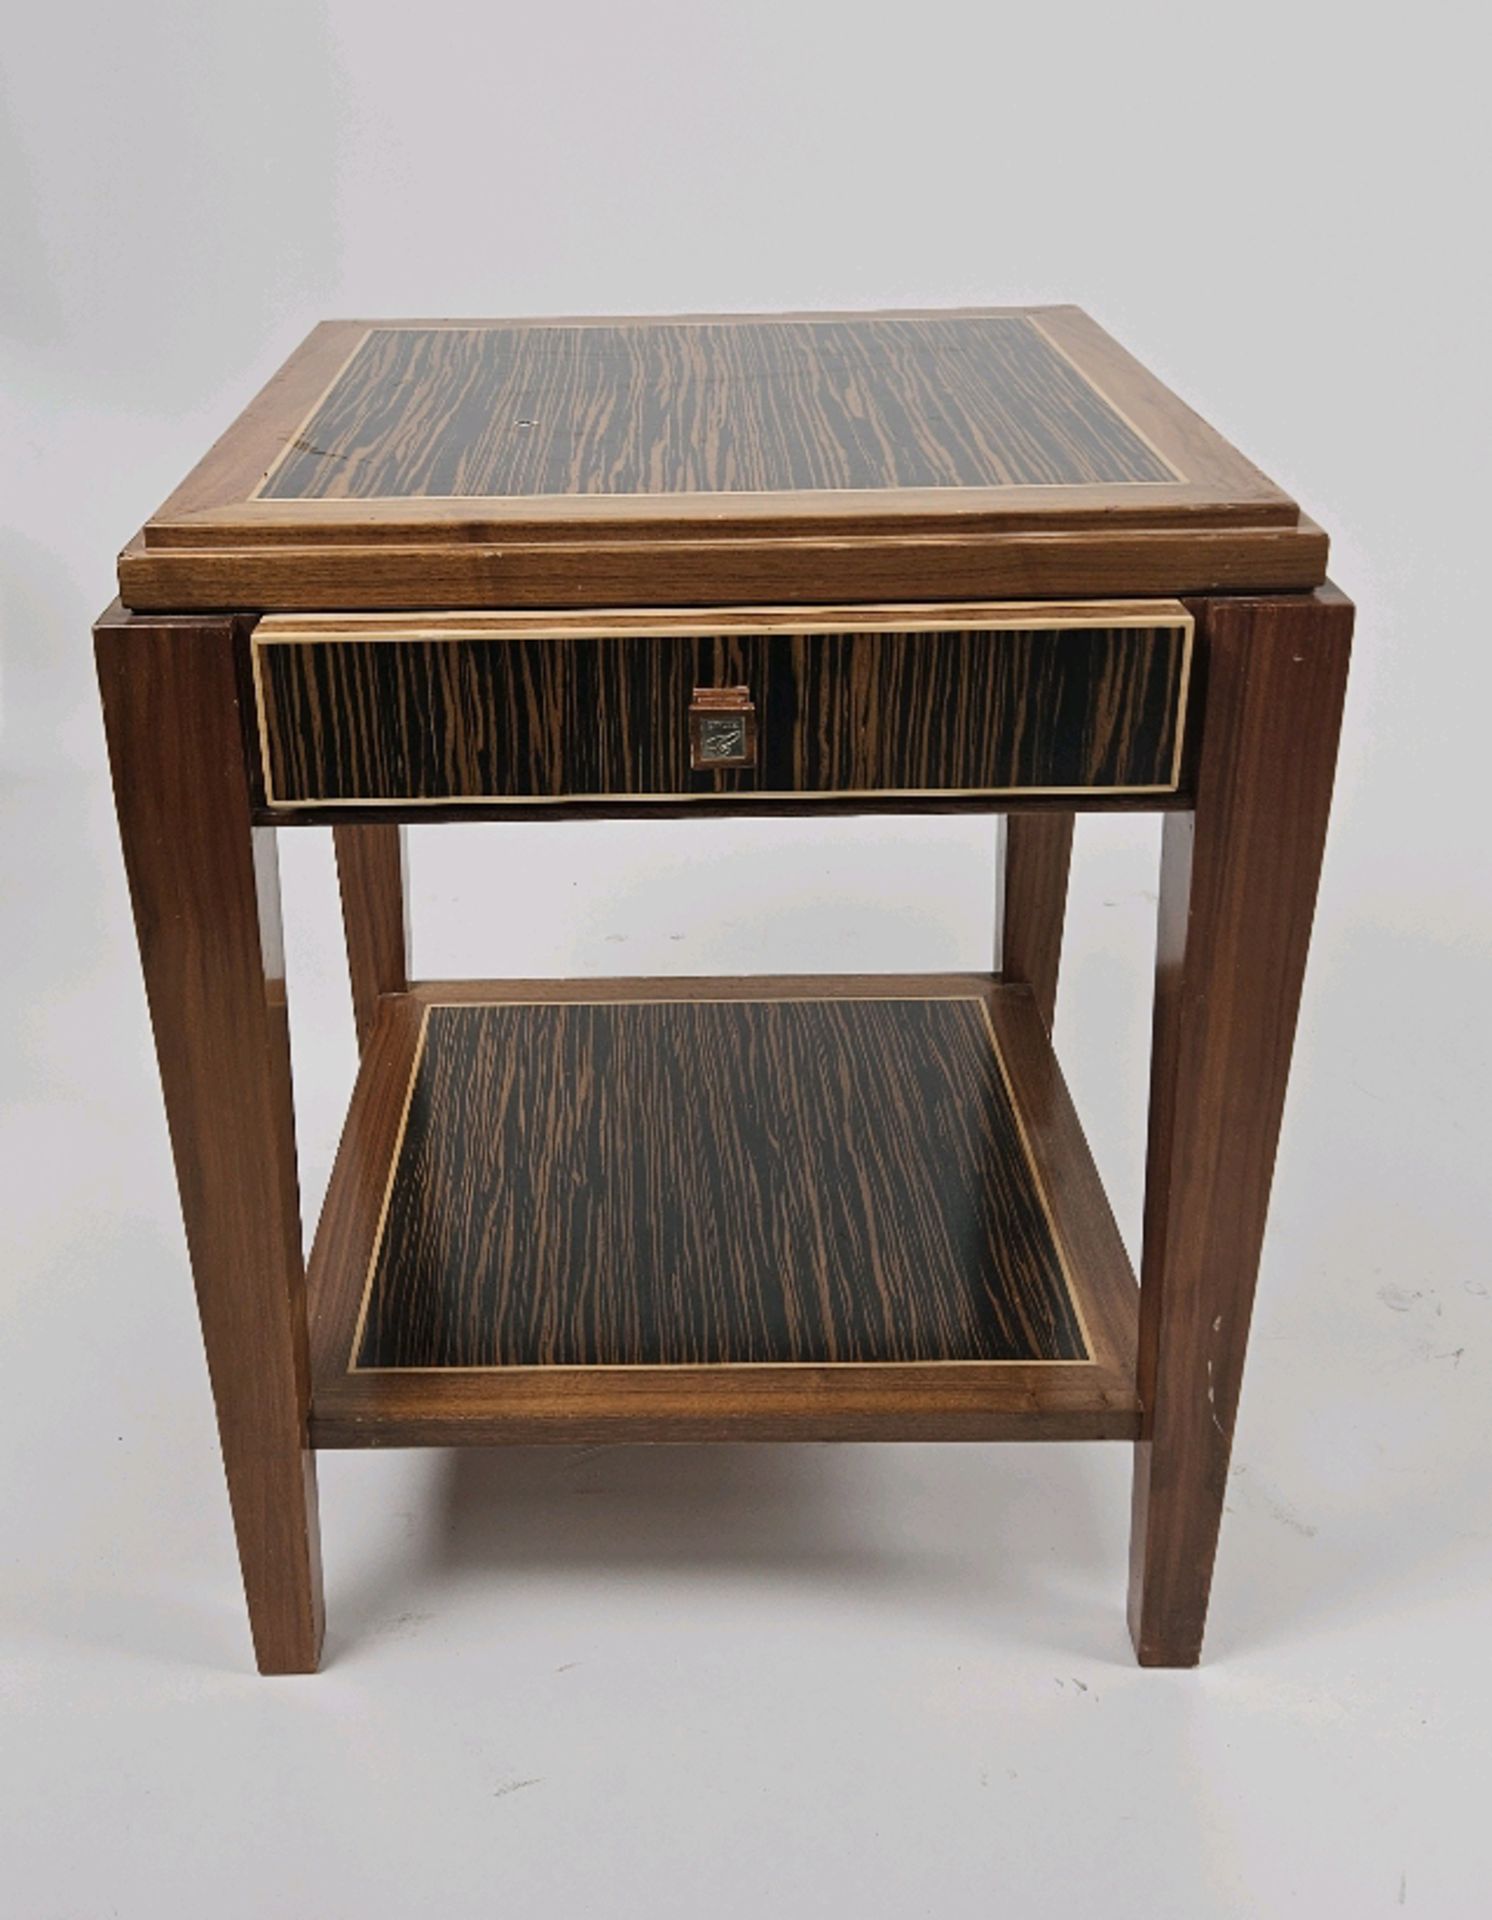 David Linley Side Table - Image 5 of 5